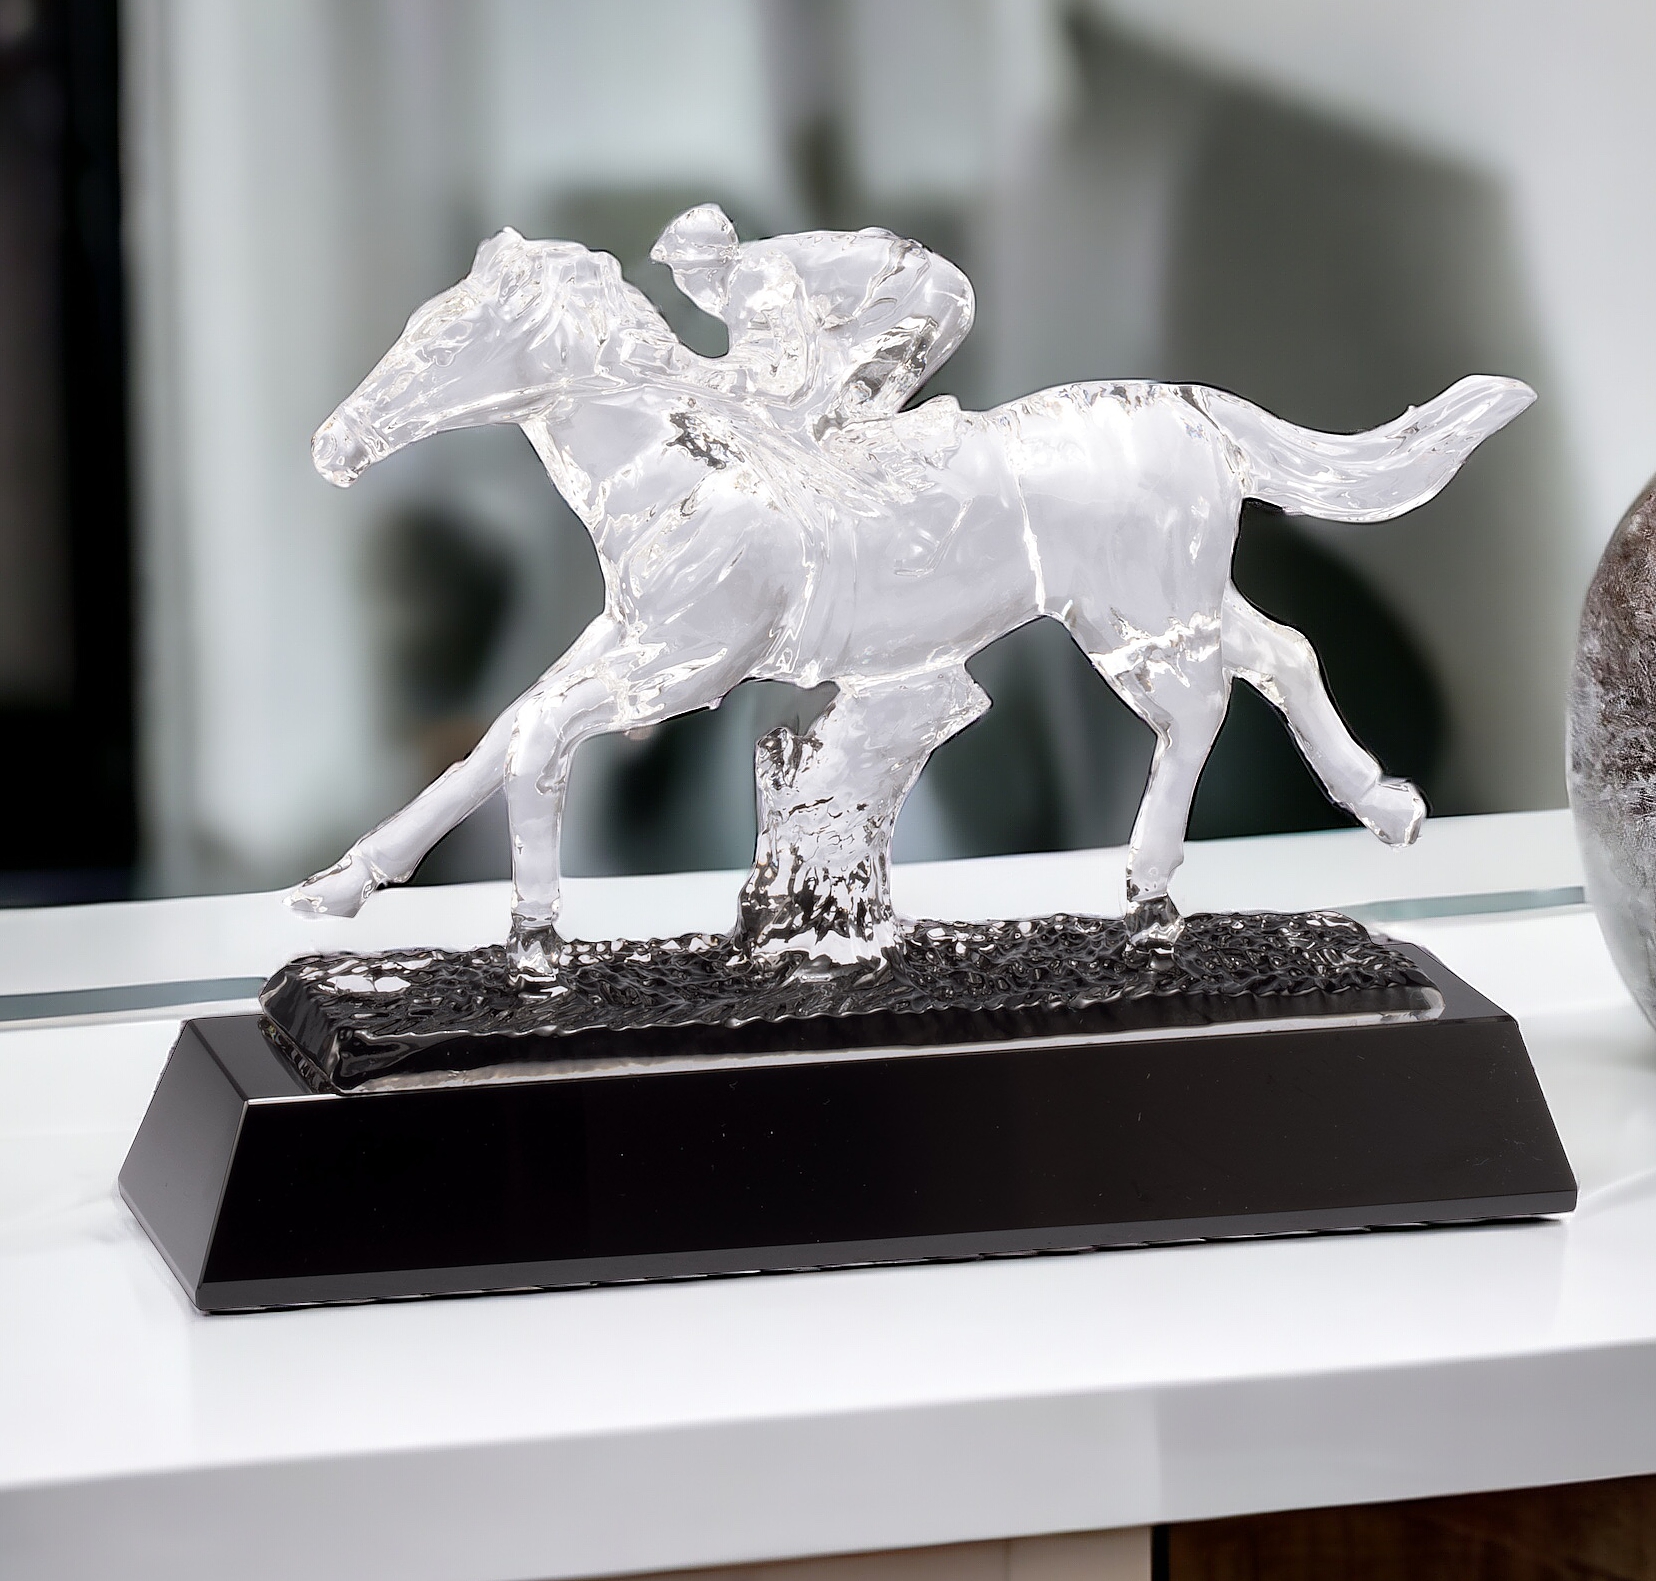 Our Crystal Horse Racing Trophy sitting on a white shelf. The trophy features a clear crystal horse & jockey mounted on a black crystal base. The base includes a black & silver engraving plate for personalization. This CRY599 Horse Racing Sculpture is 7" x 9.5" in size and weighs over 5 lbs.